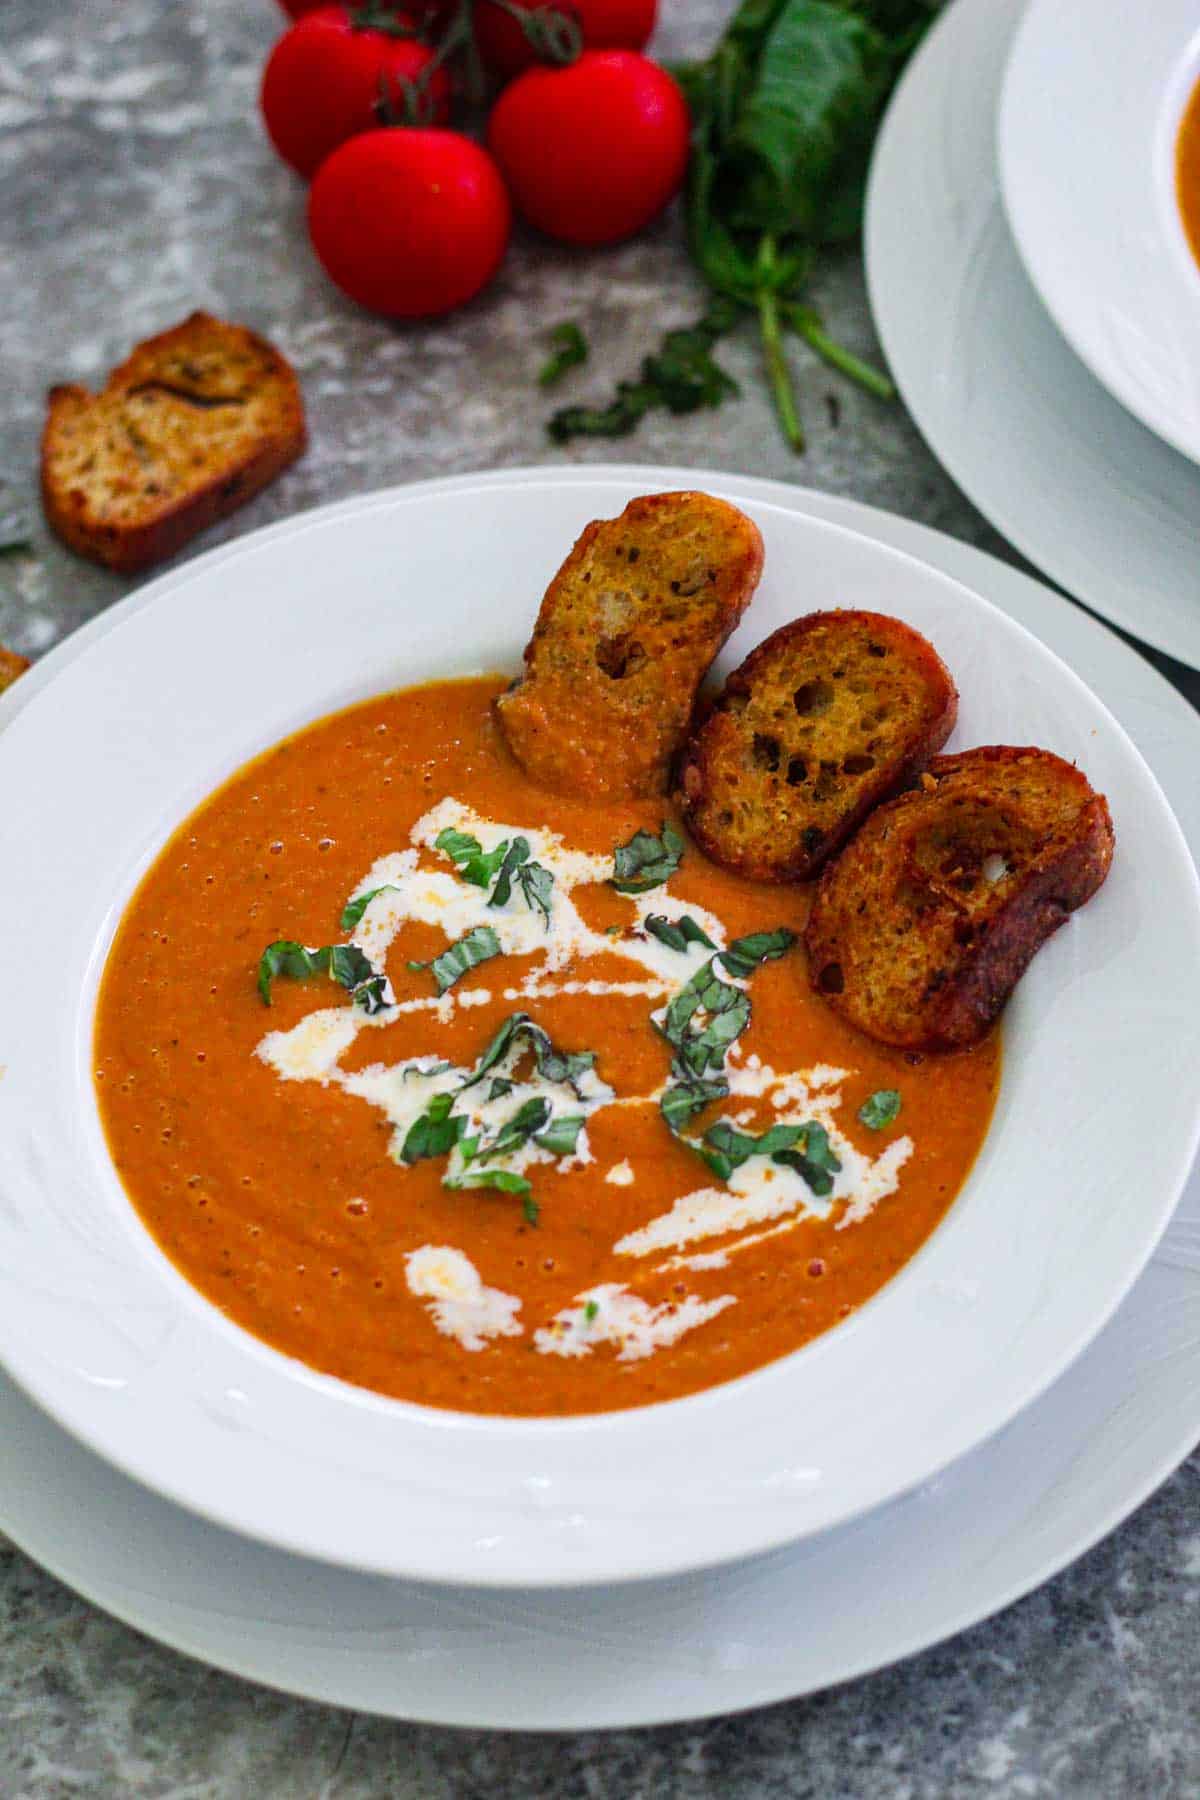 Roasted tomato soup shown served on a white plate and garnished with croutons, heavy cream and fresh basil.